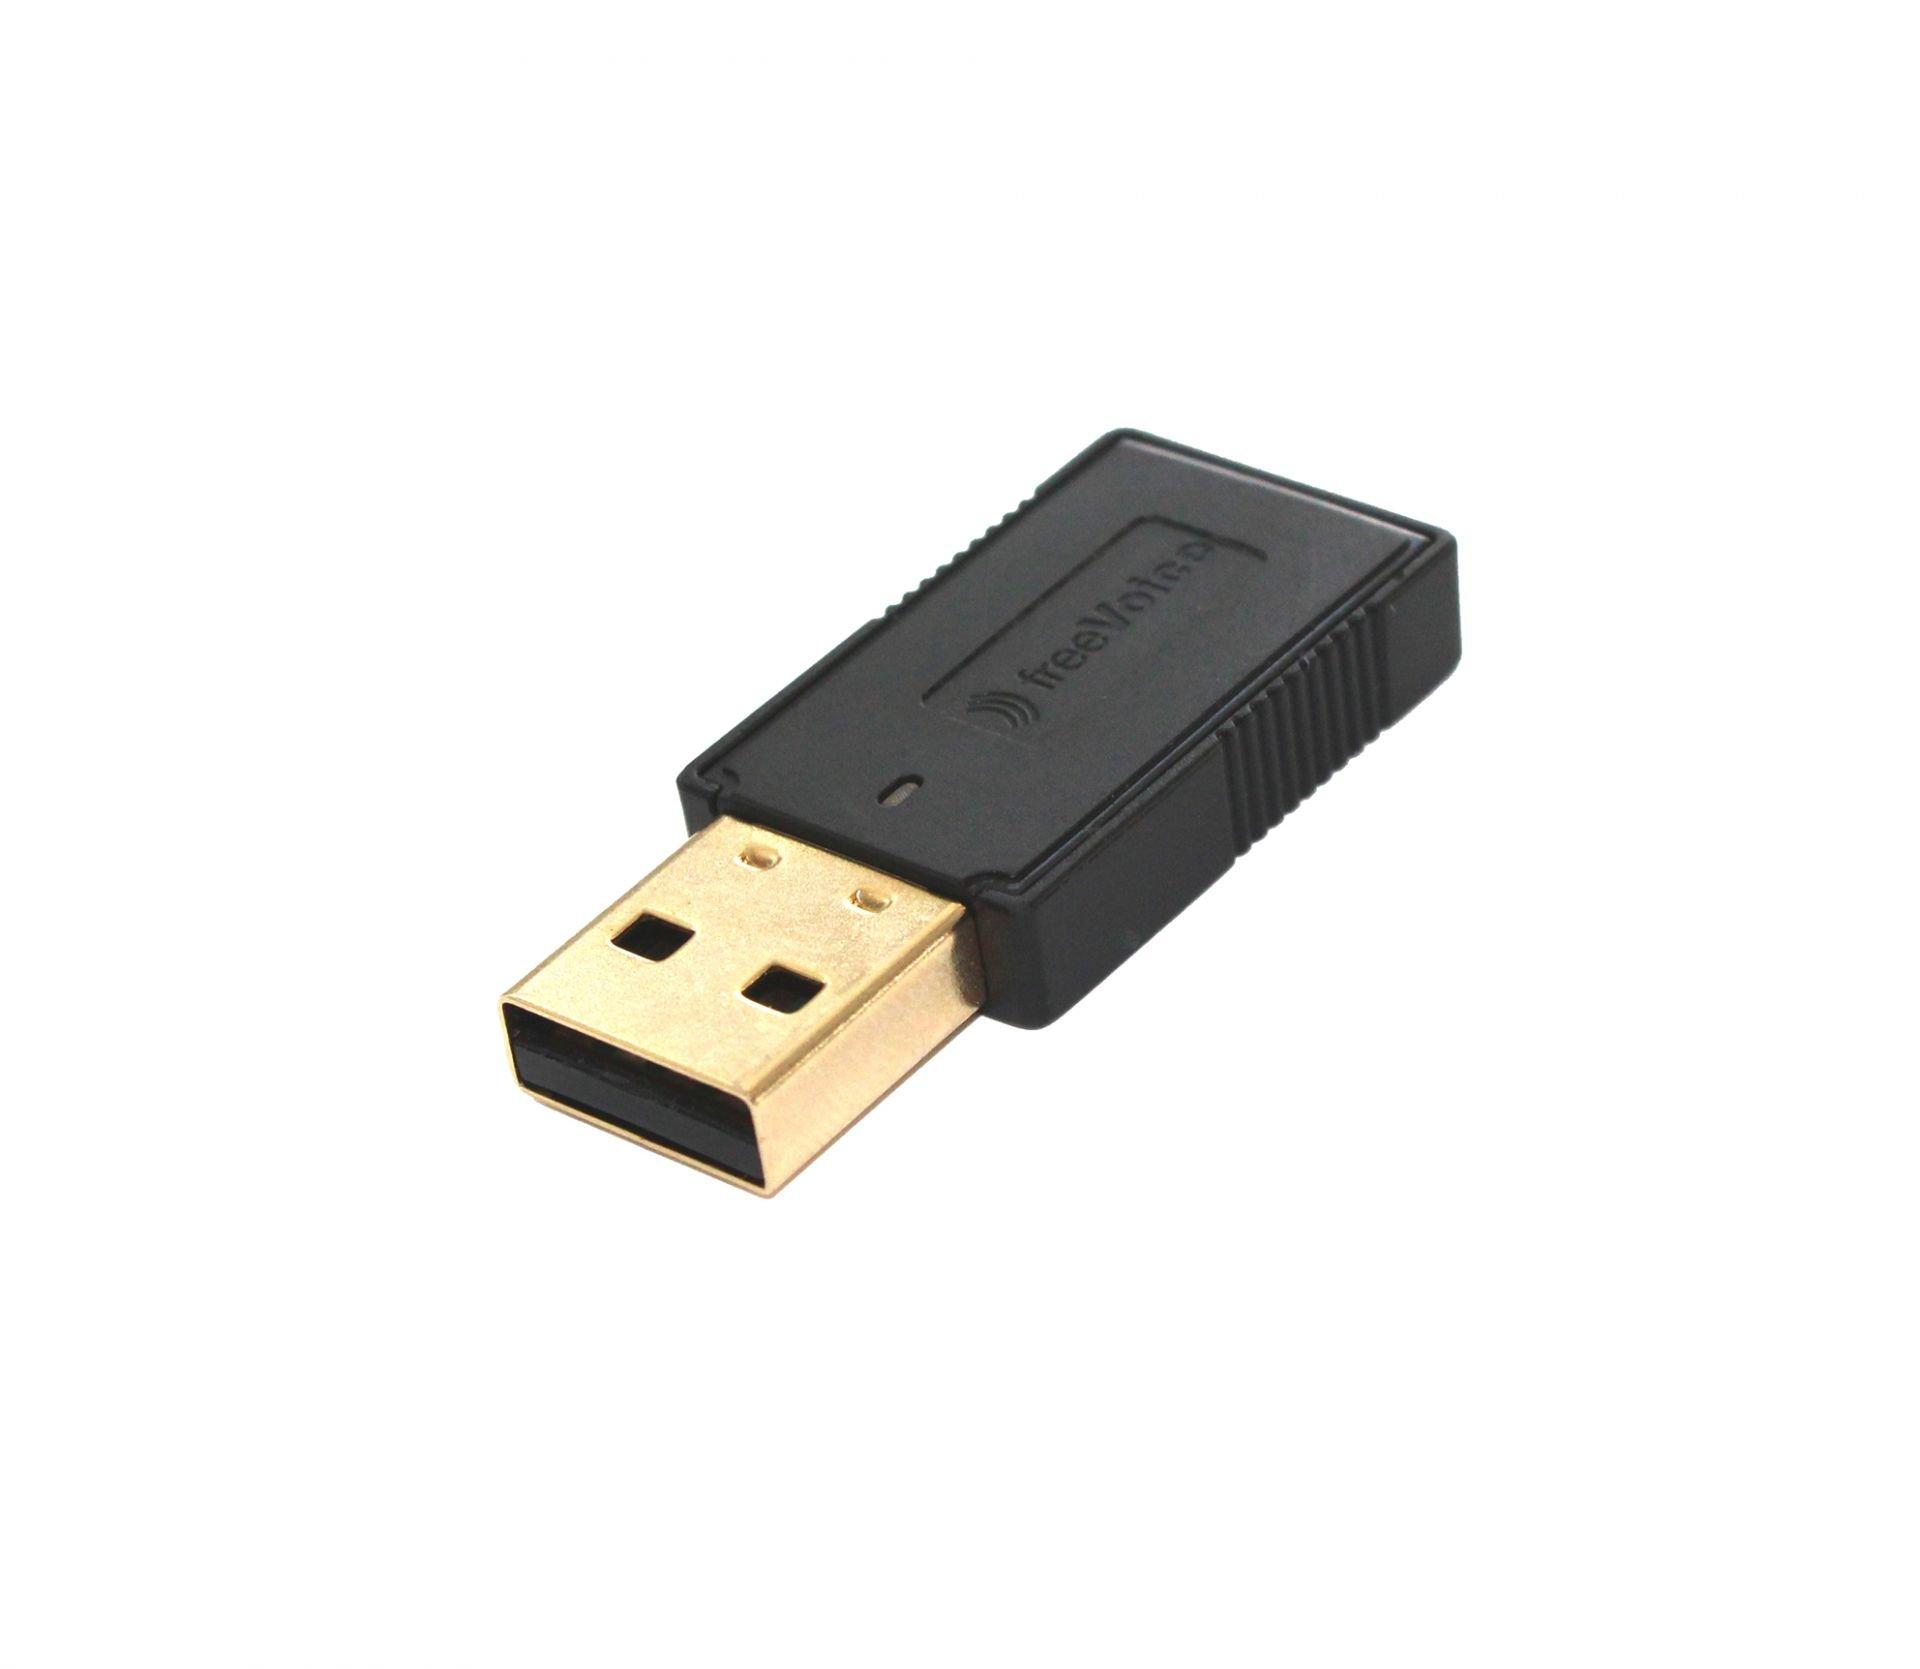 freeVoice  Connect Dongle 170 UC Eingebaut Bluetooth 